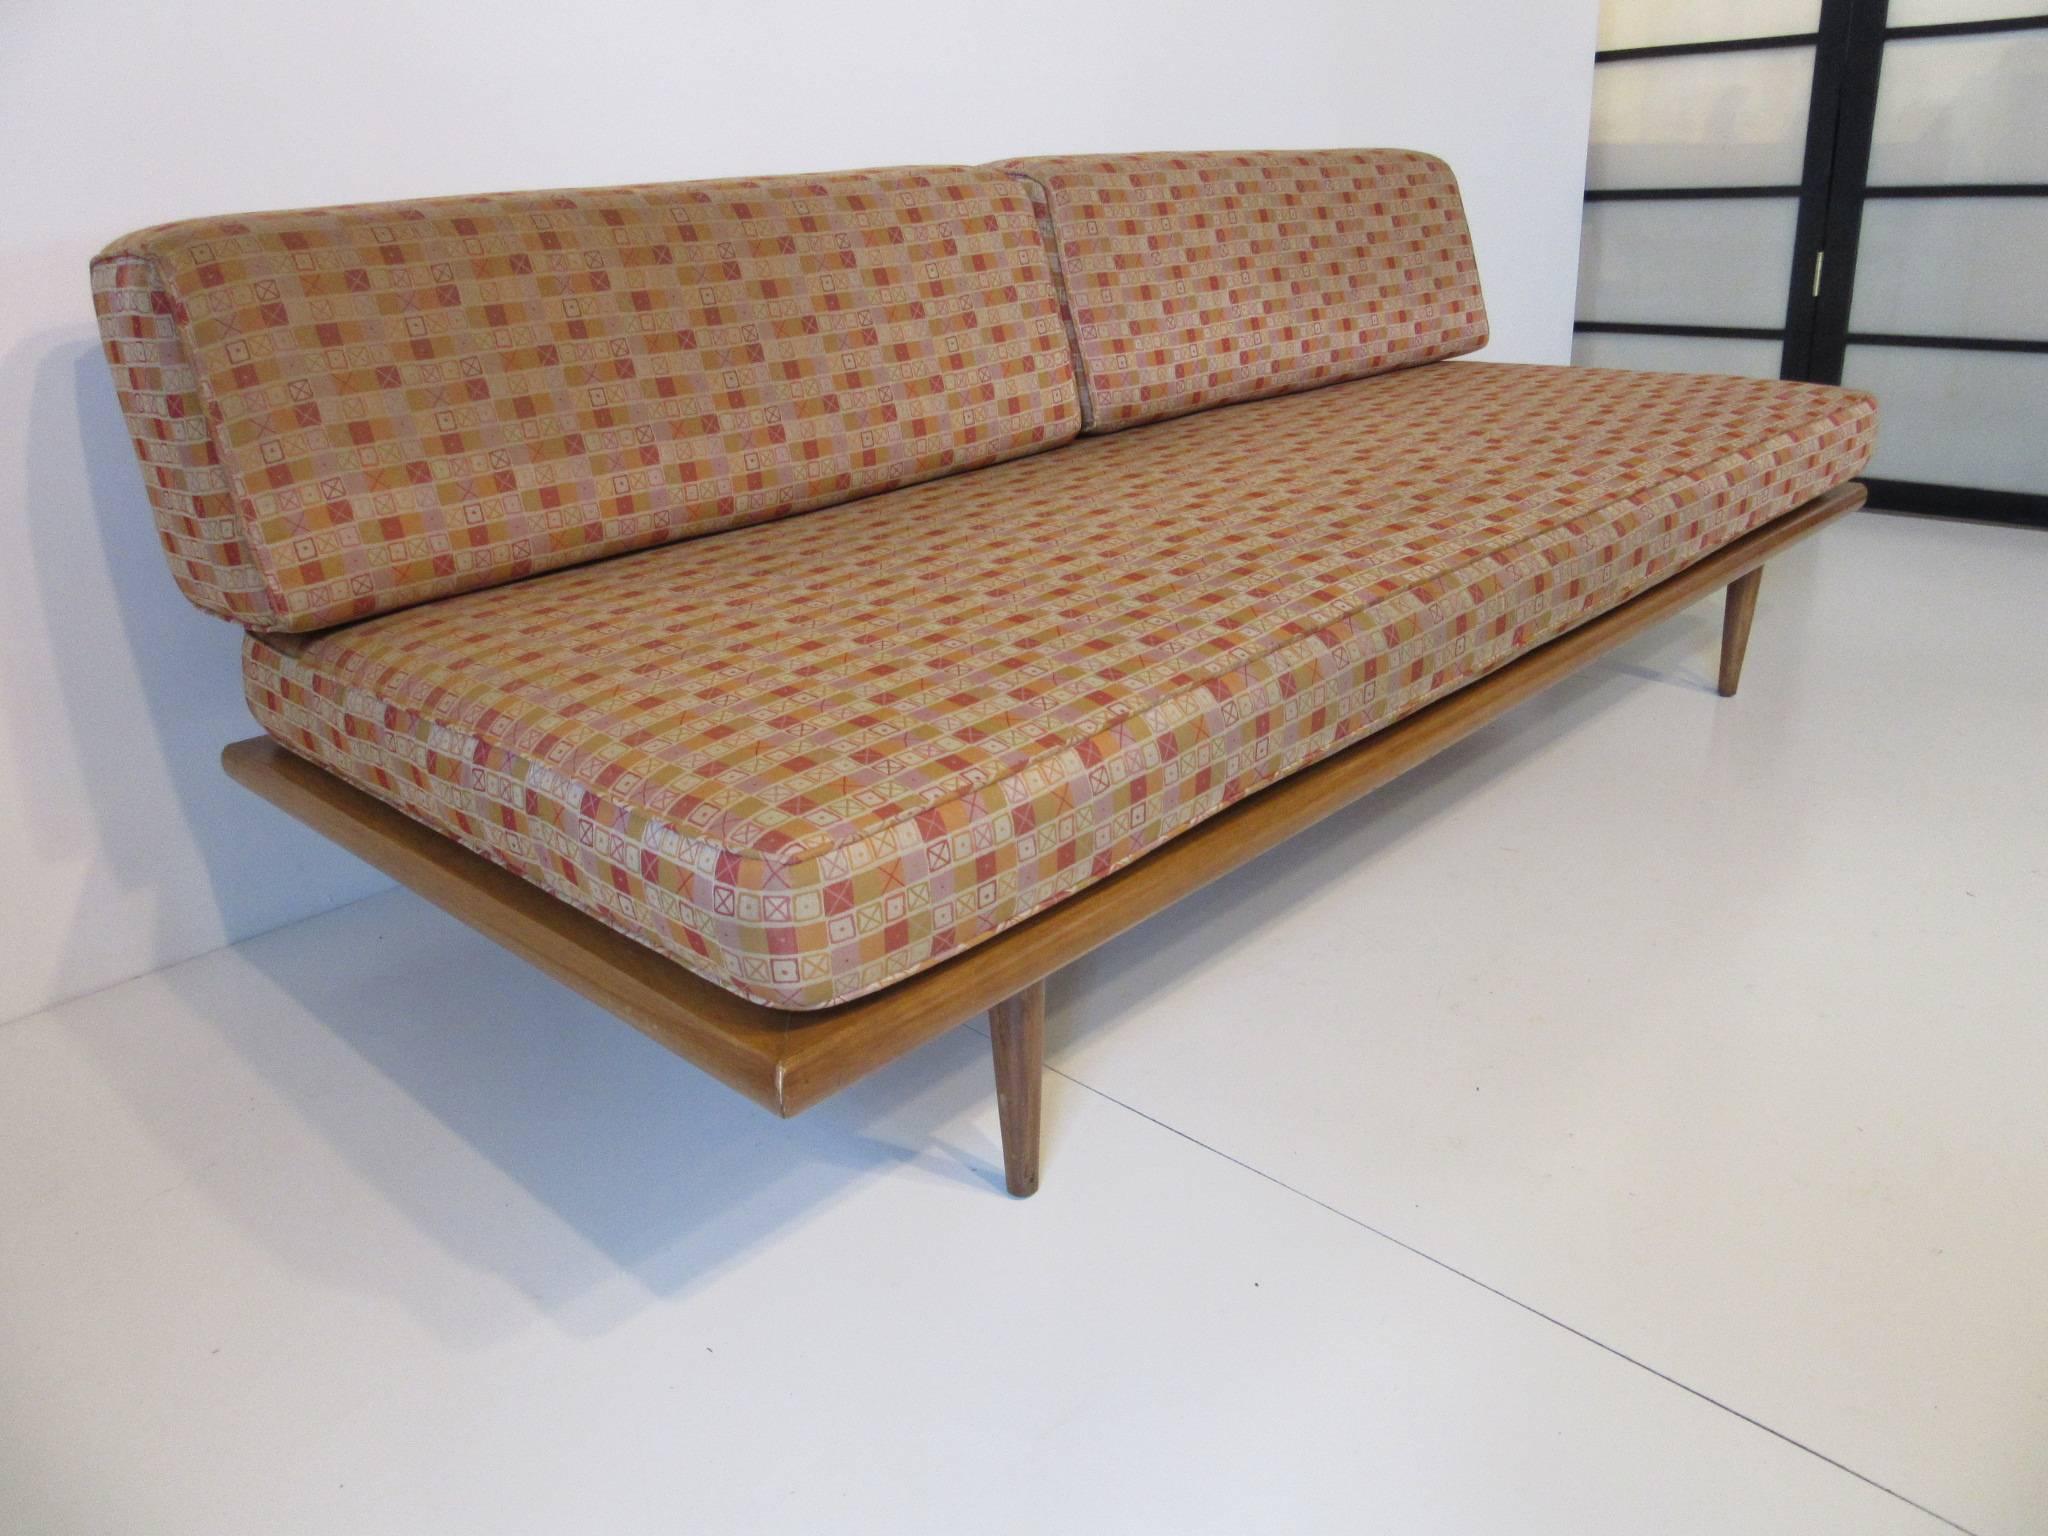 A natural birch wood framed Nelson daybed model # 5088 with back bracket, conical legs and upholstered in Ray and Charles Eames designed fabric . Retains the manufactures tag to the bottom frame by the Herman Miller Furniture company. Includes the